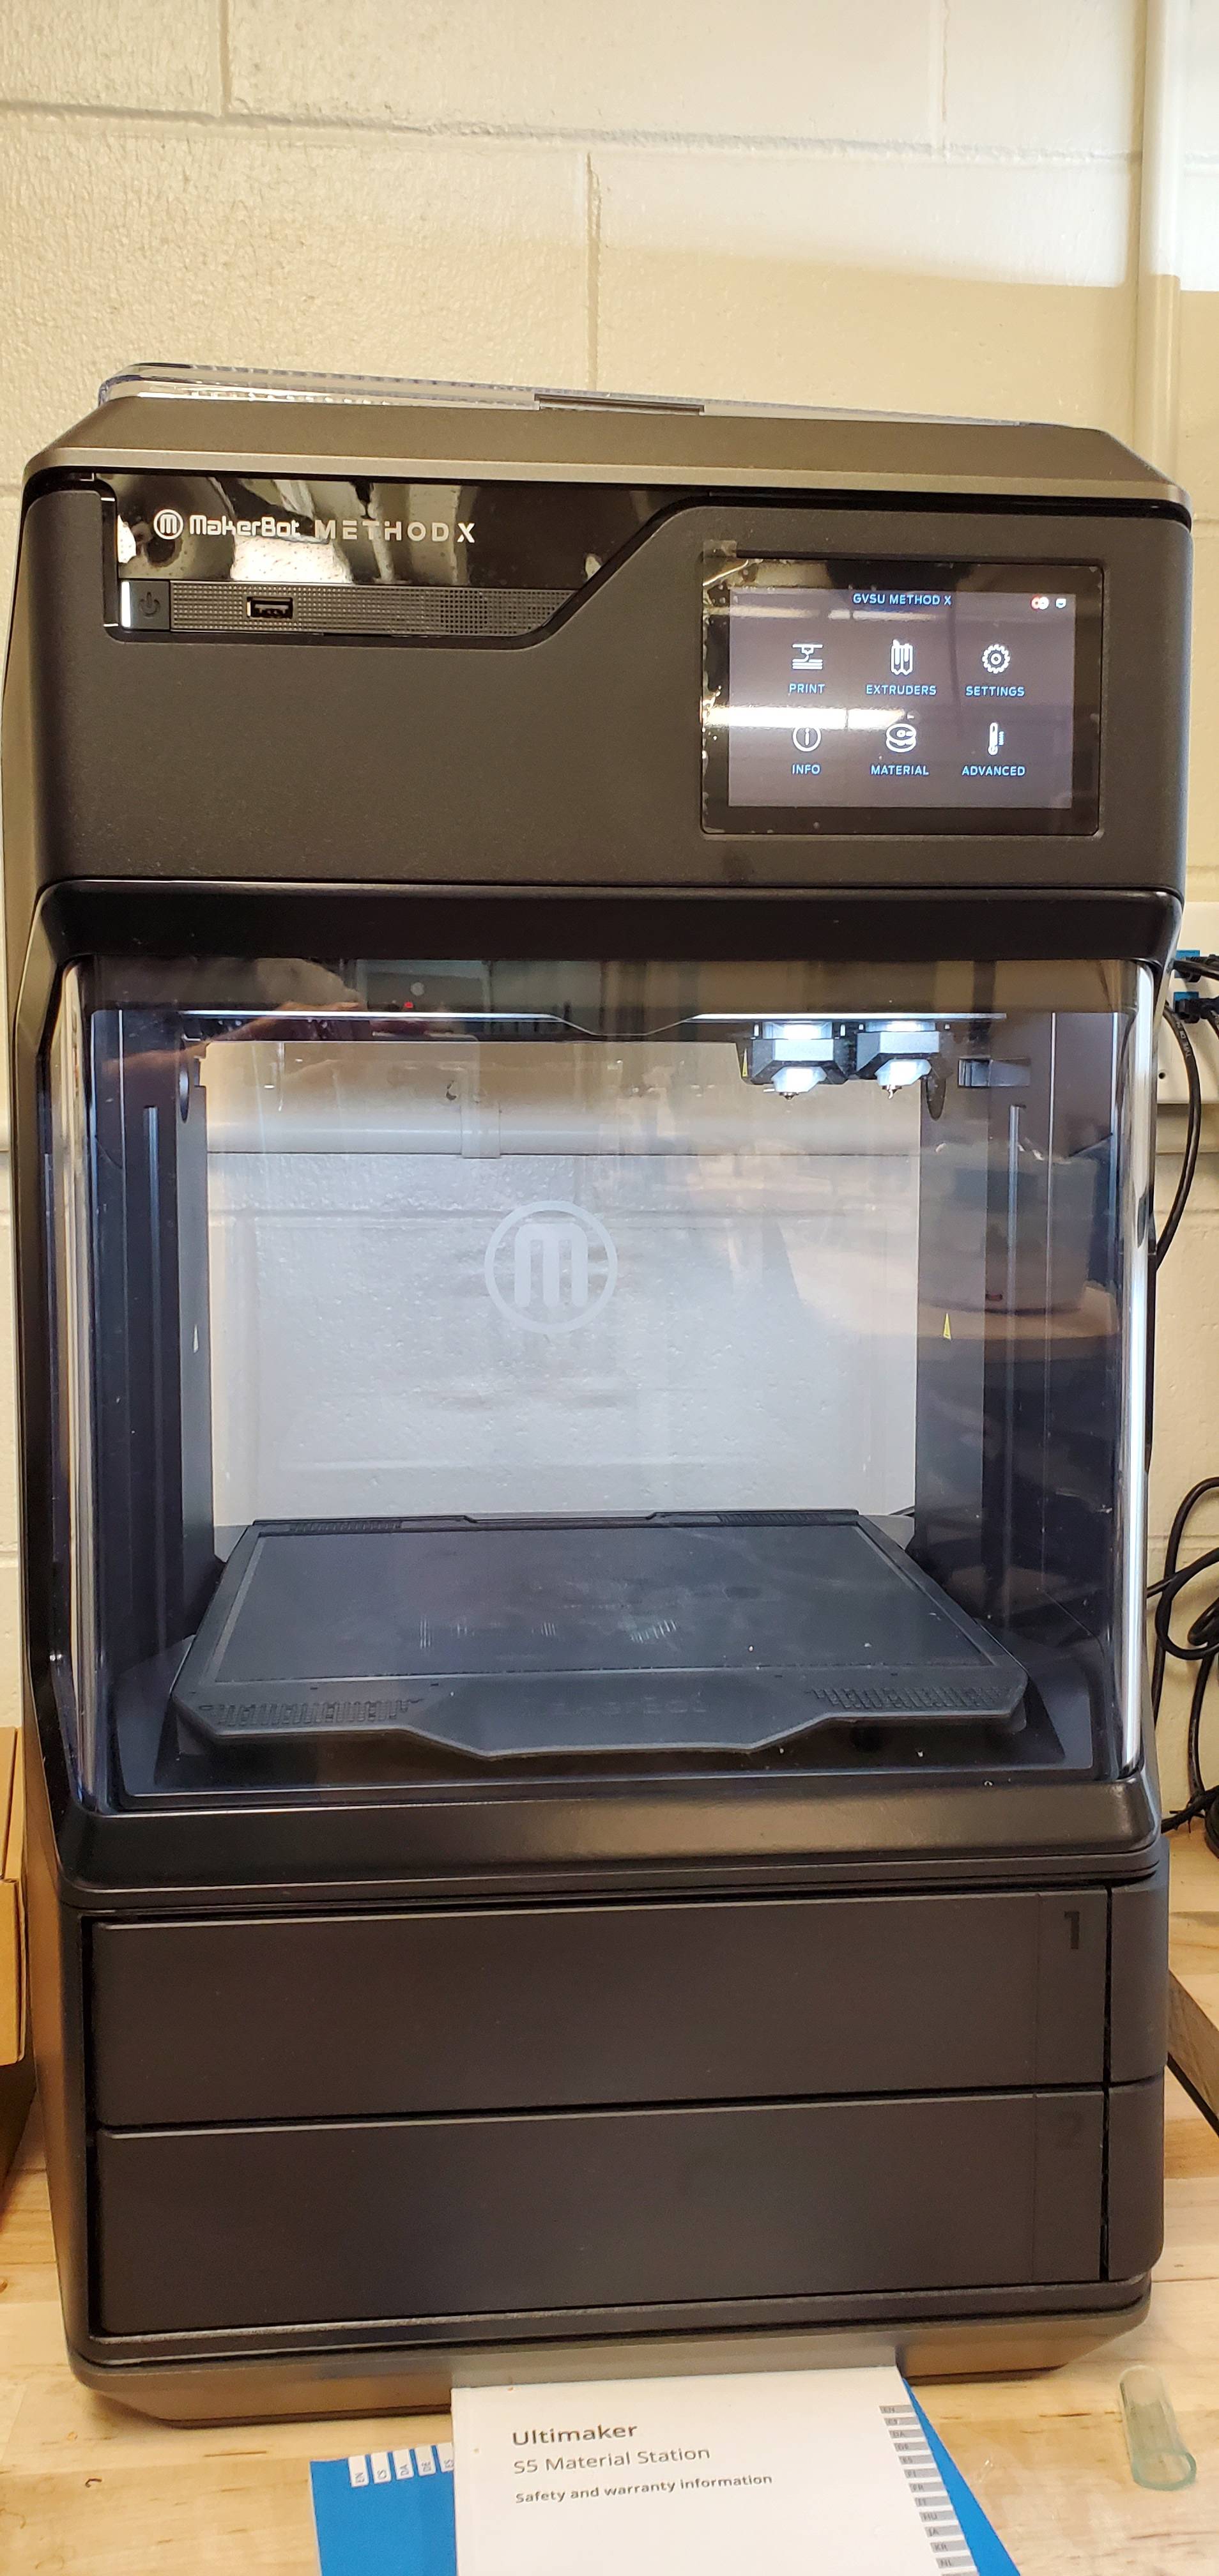 Industrial-like 3D printer in the rapid prototyping lab